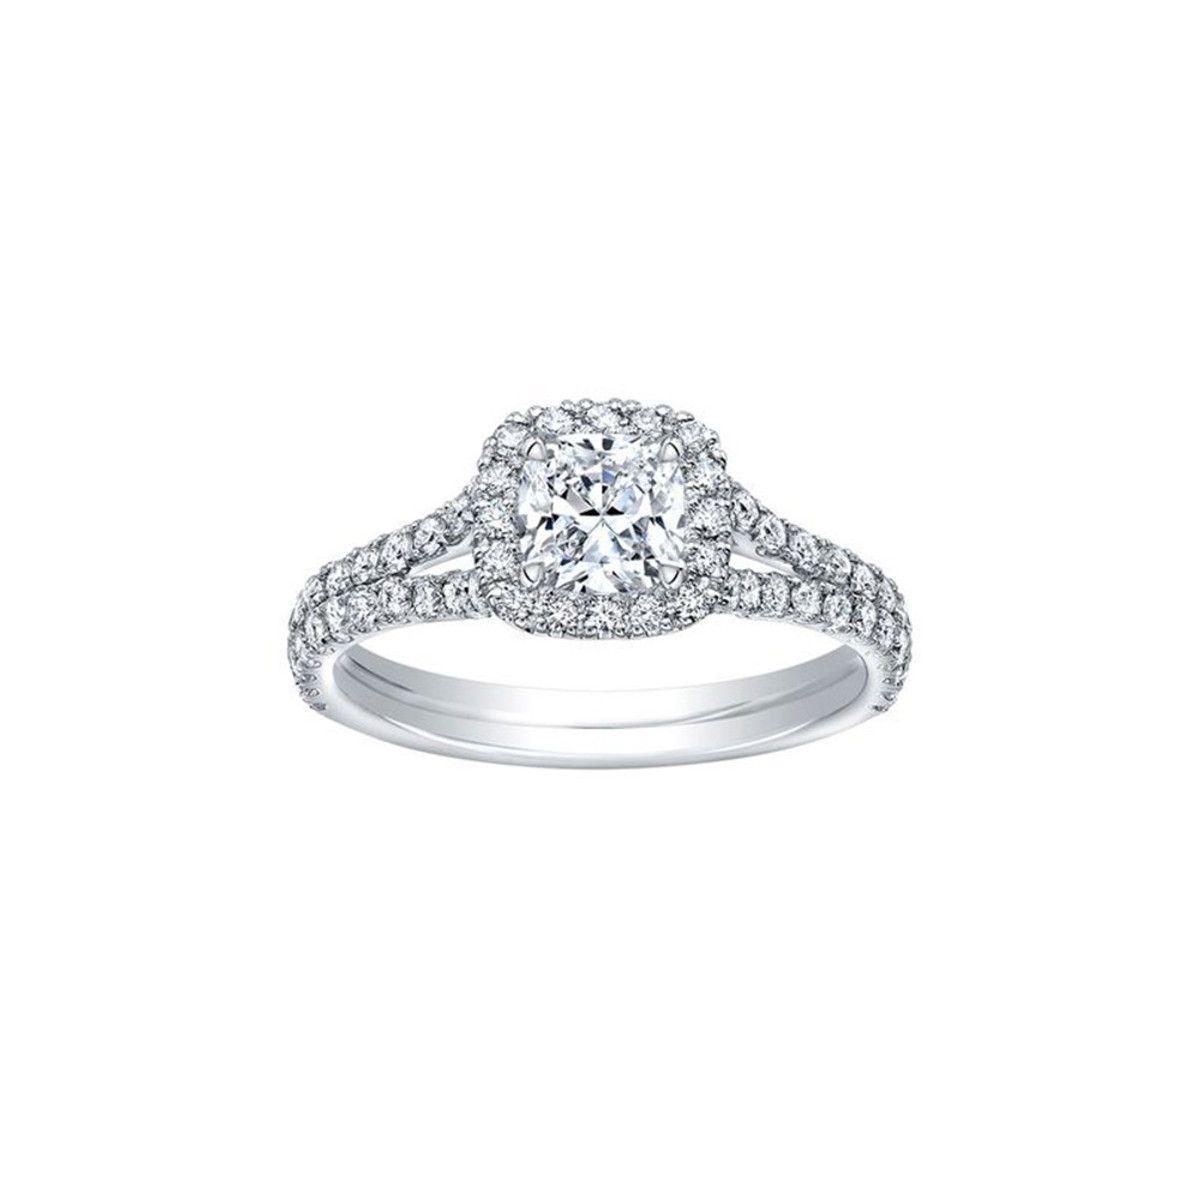 Hyde Park Collection 18K White Gold Halo Diamond Engagement Ring-DSHFF0286